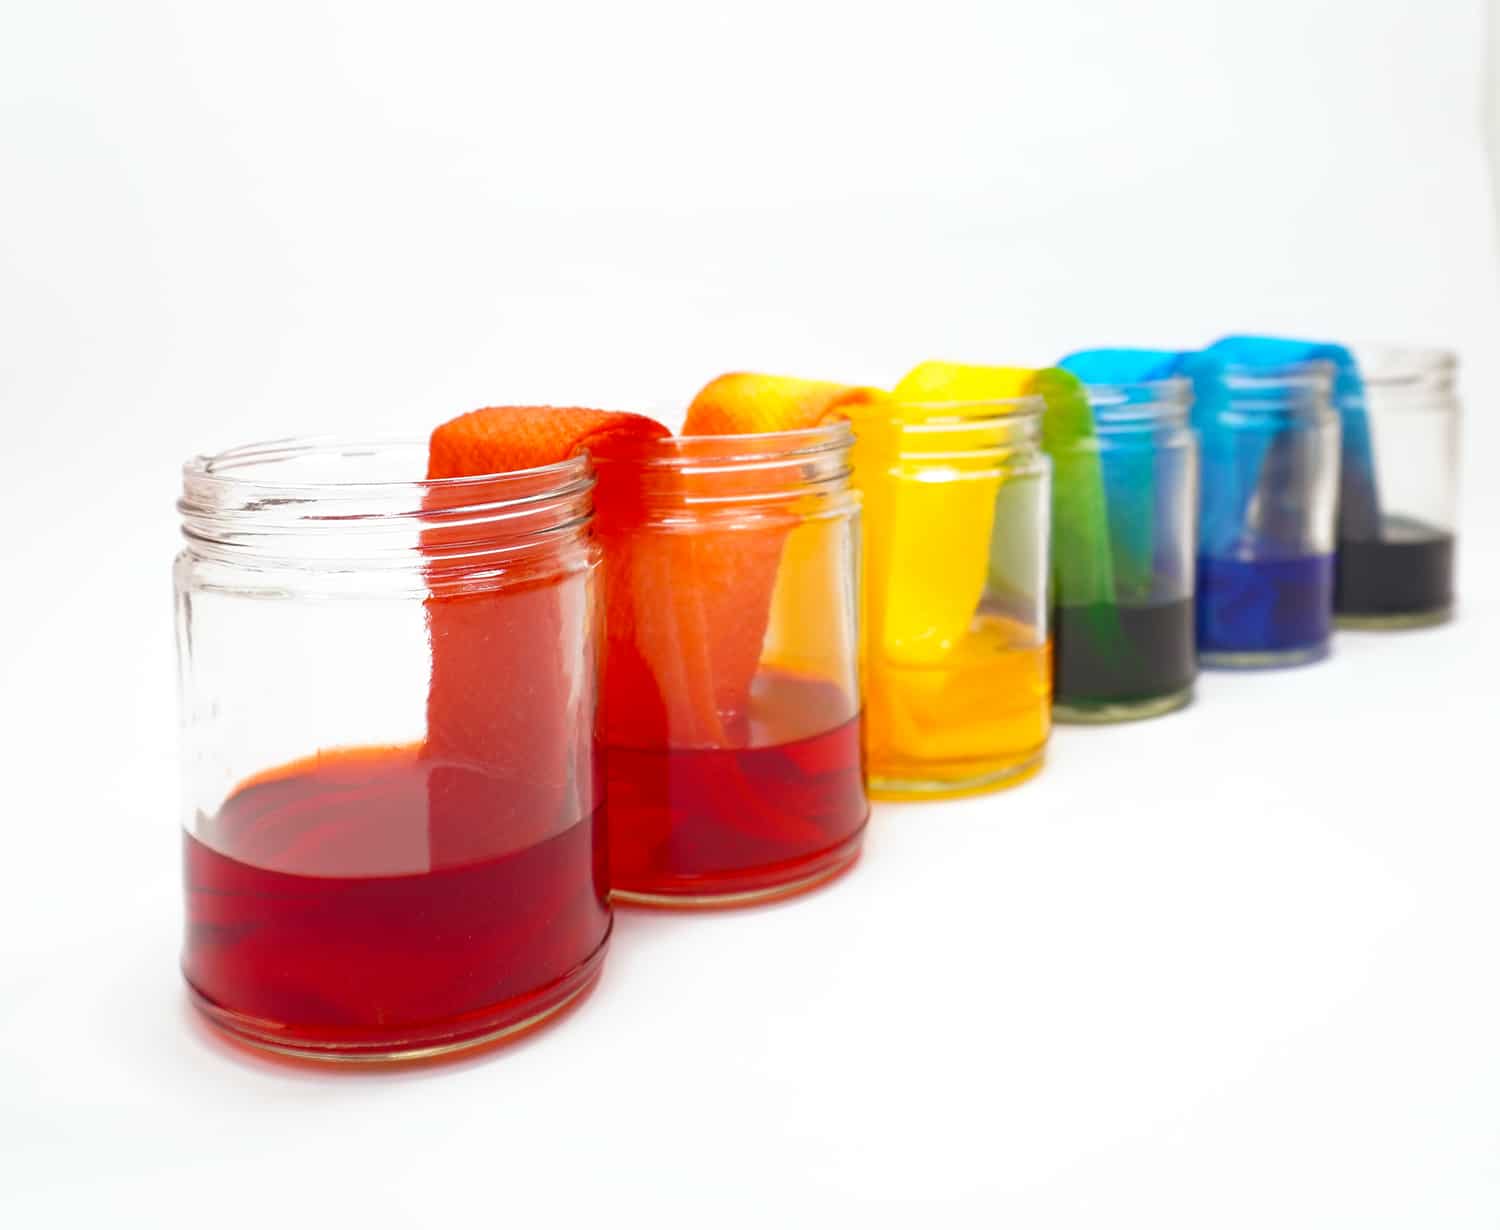 walking rainbow stem activity jars lined out in a straight line